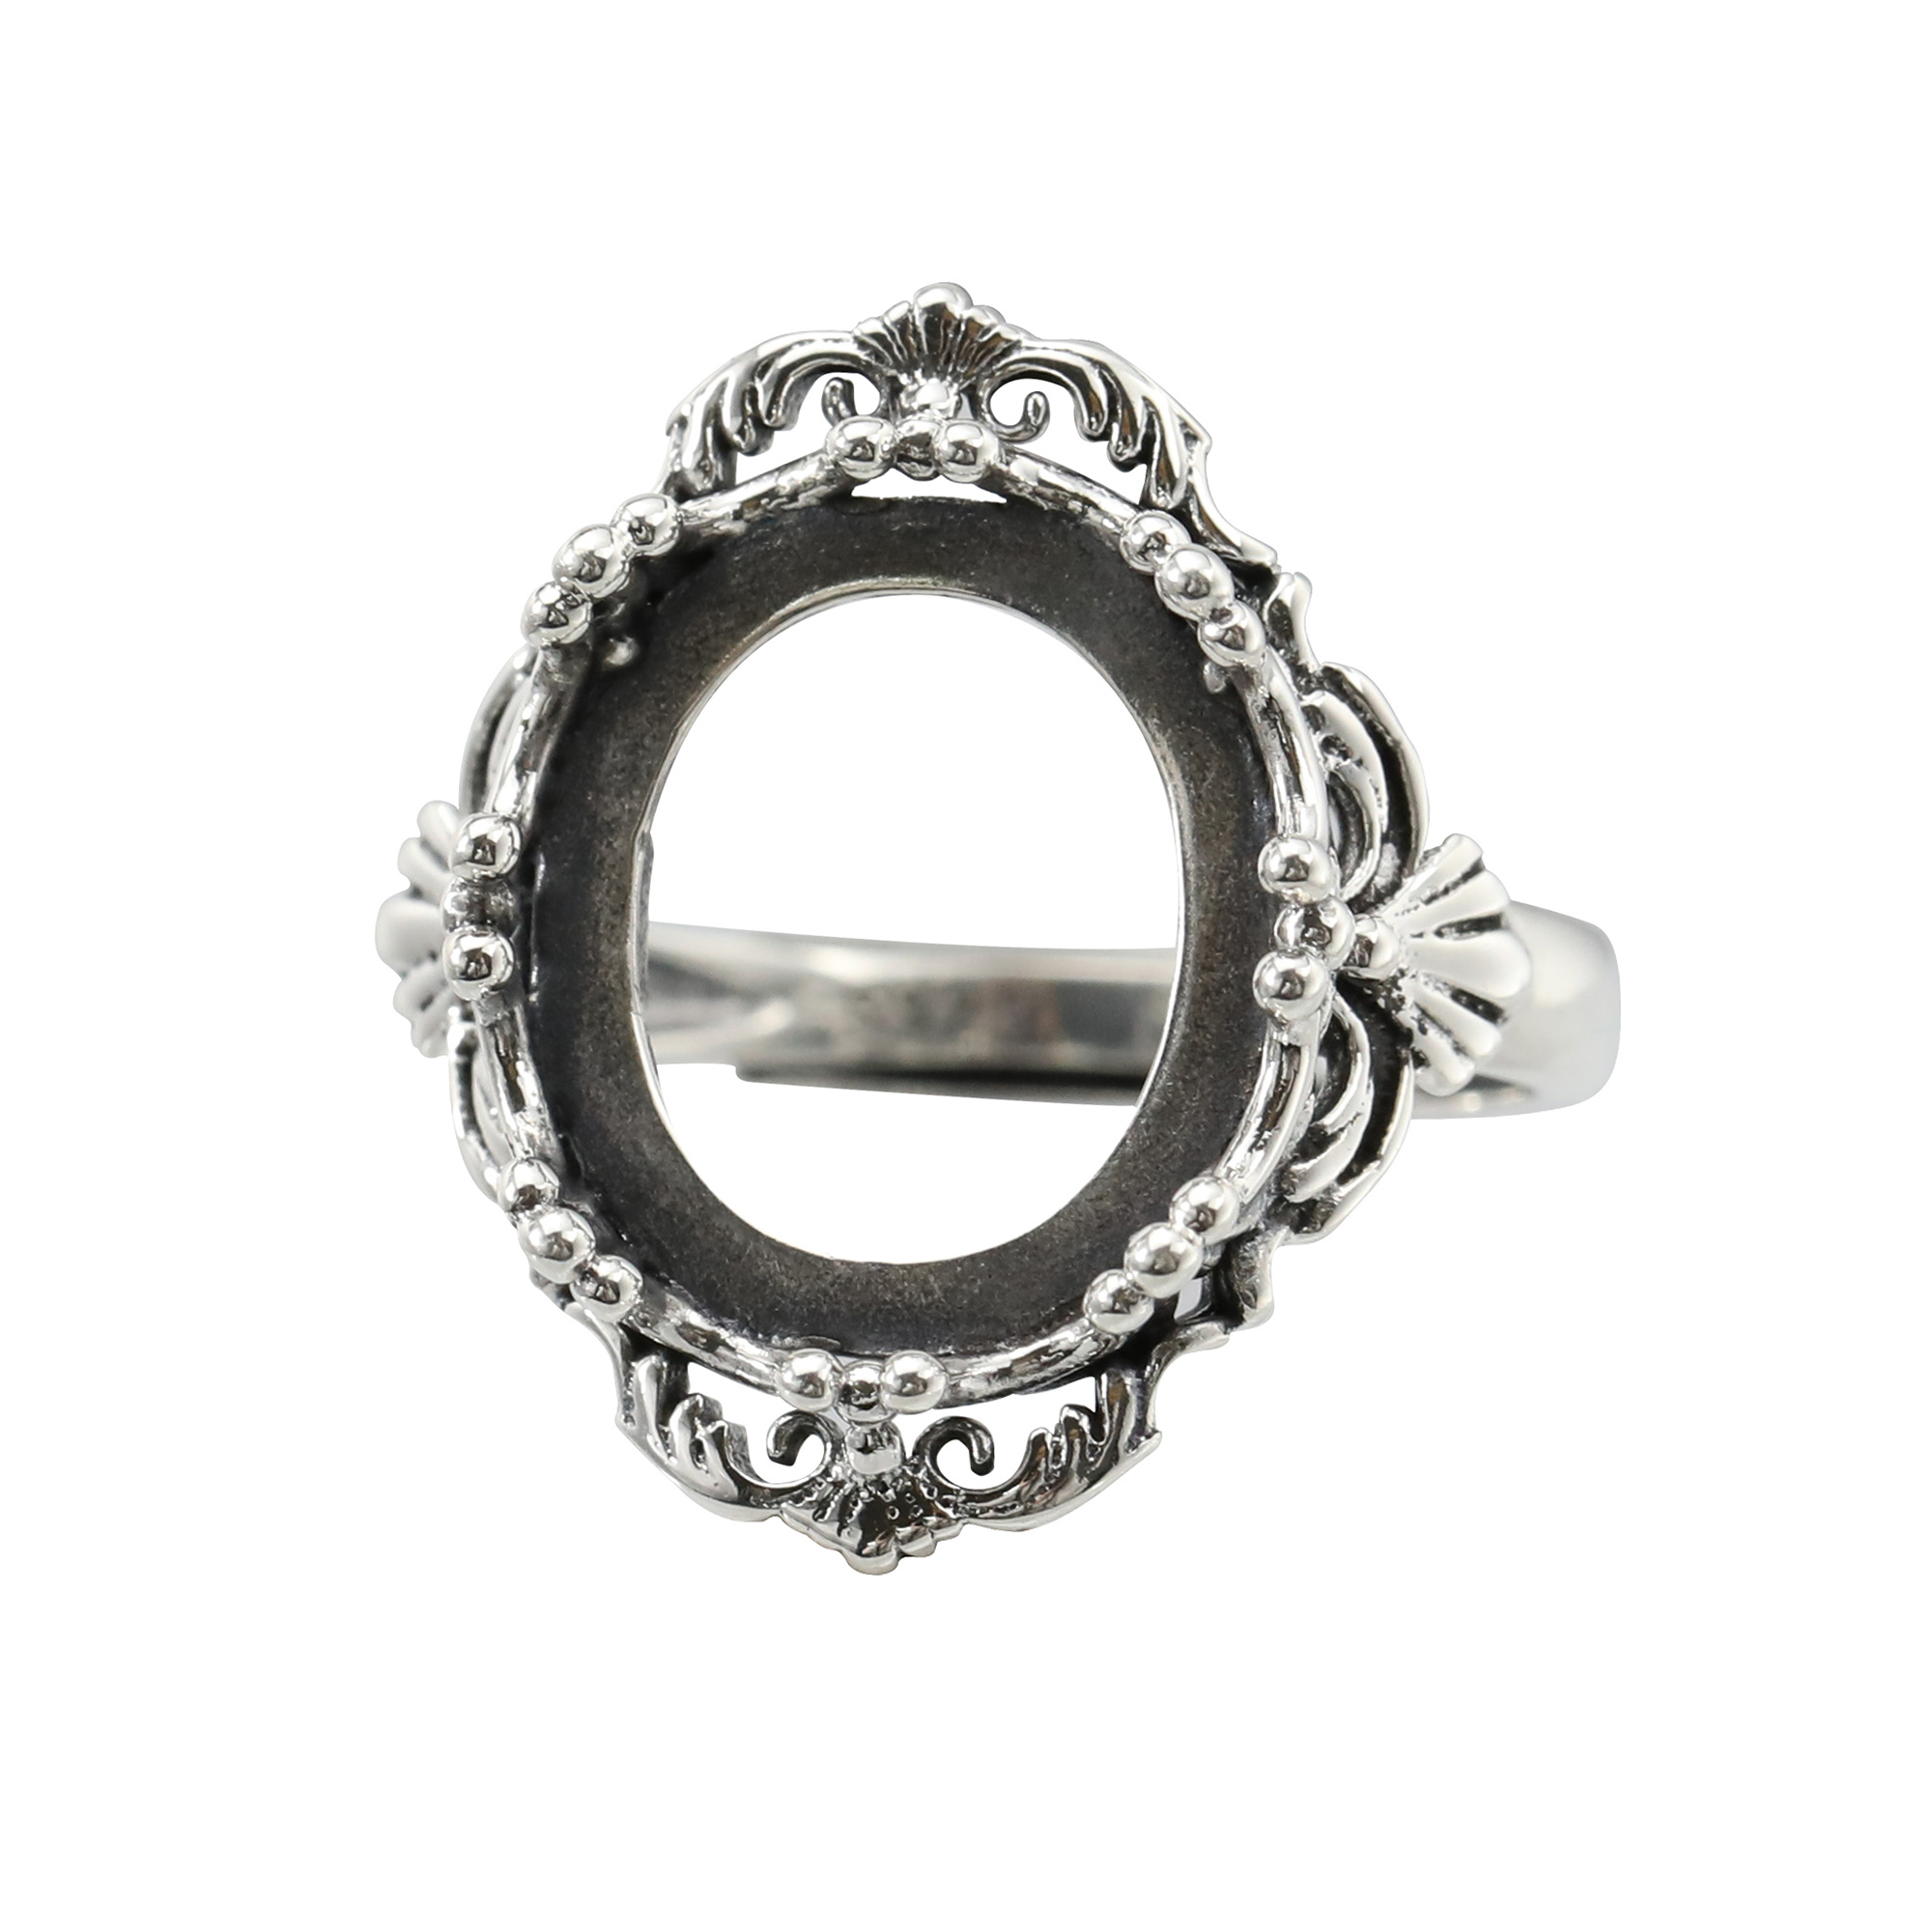 12x14MM Oval Ring Settings Art Deco Vintage Style Antiqued Solid 925 Sterling Silver Adjustable Ring Bezel 1222050 - Click Image to Close